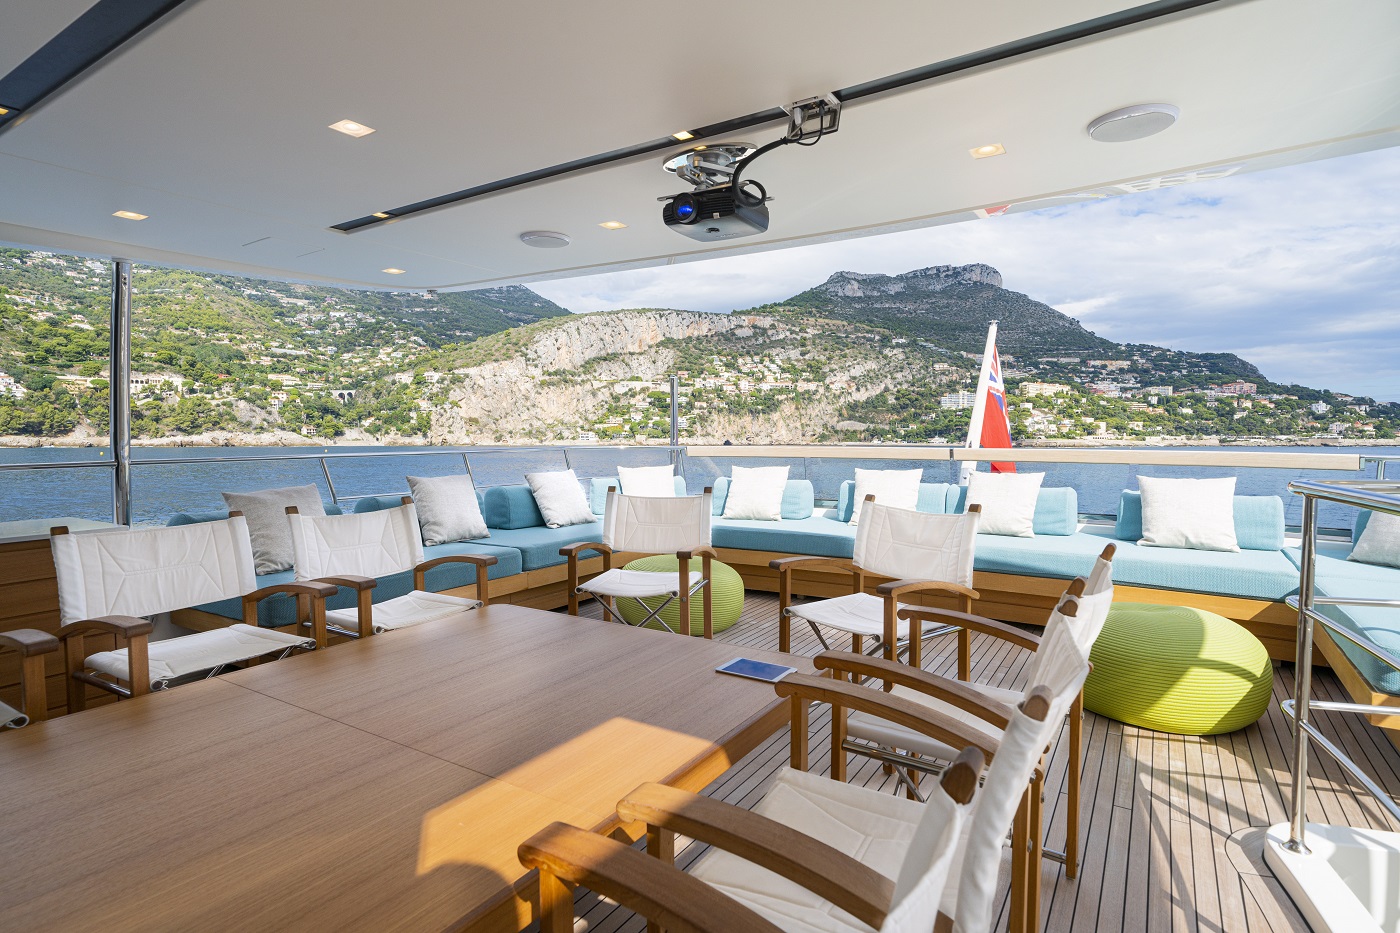 Outside dining and living room area Sosa SanLorenzo yacht for sale Yachtzoo